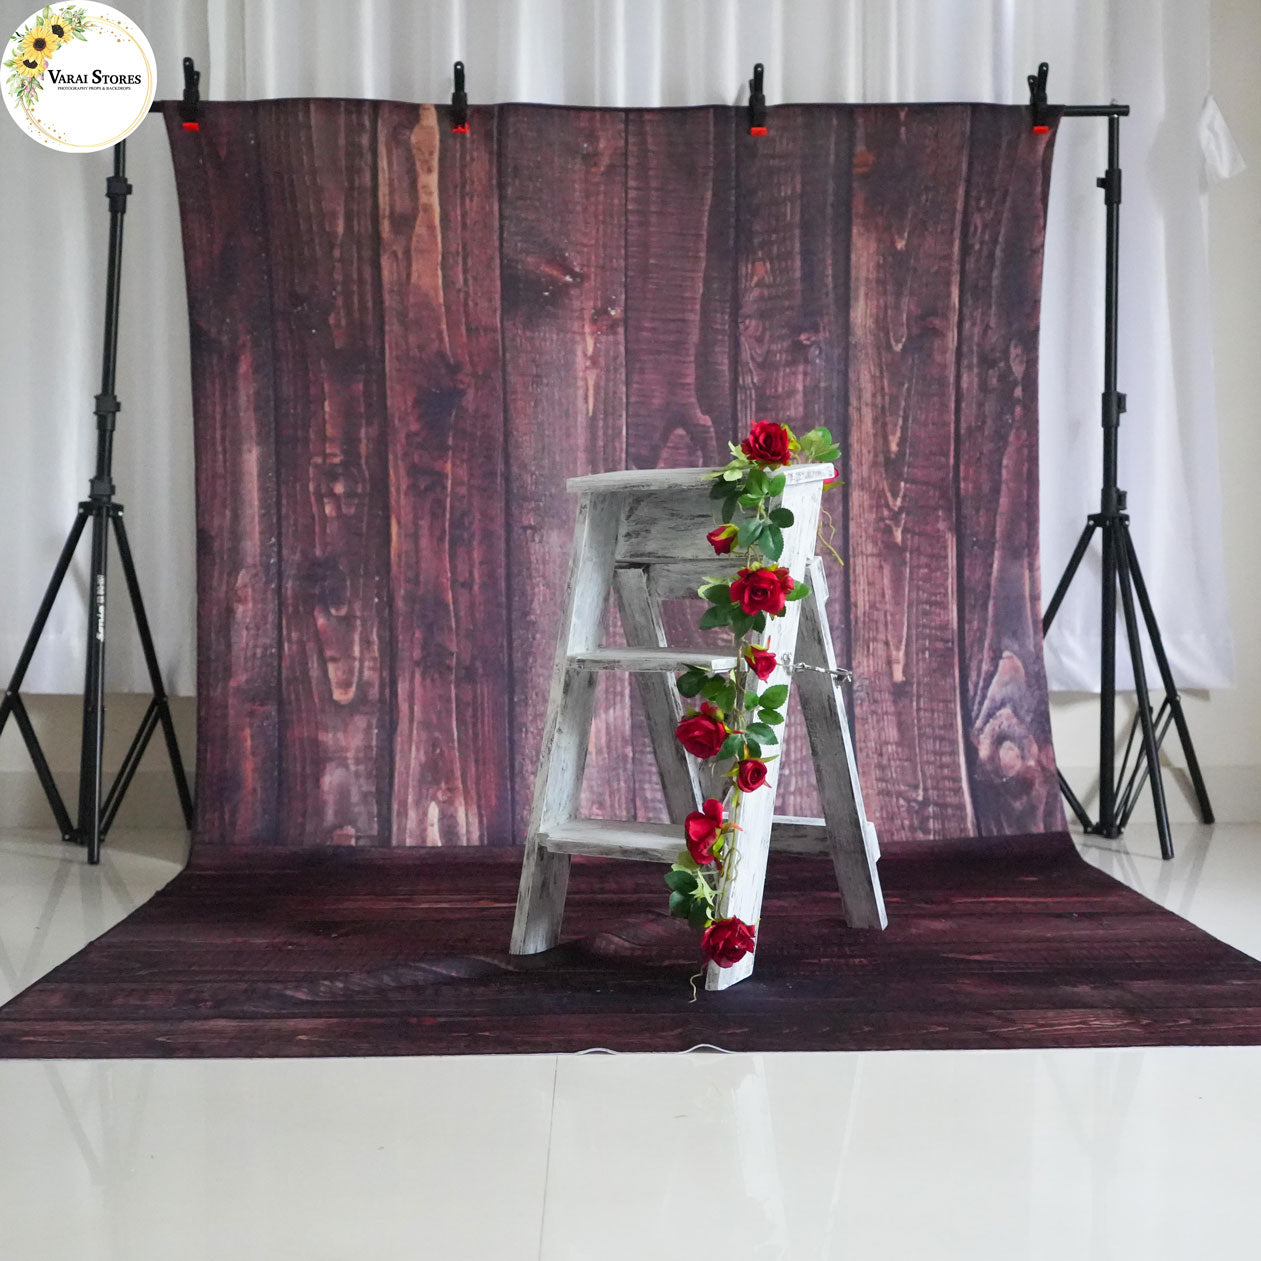 Portrait Rustic Wood - Printed Baby Backdrop - FABRIC (PRE ORDER)